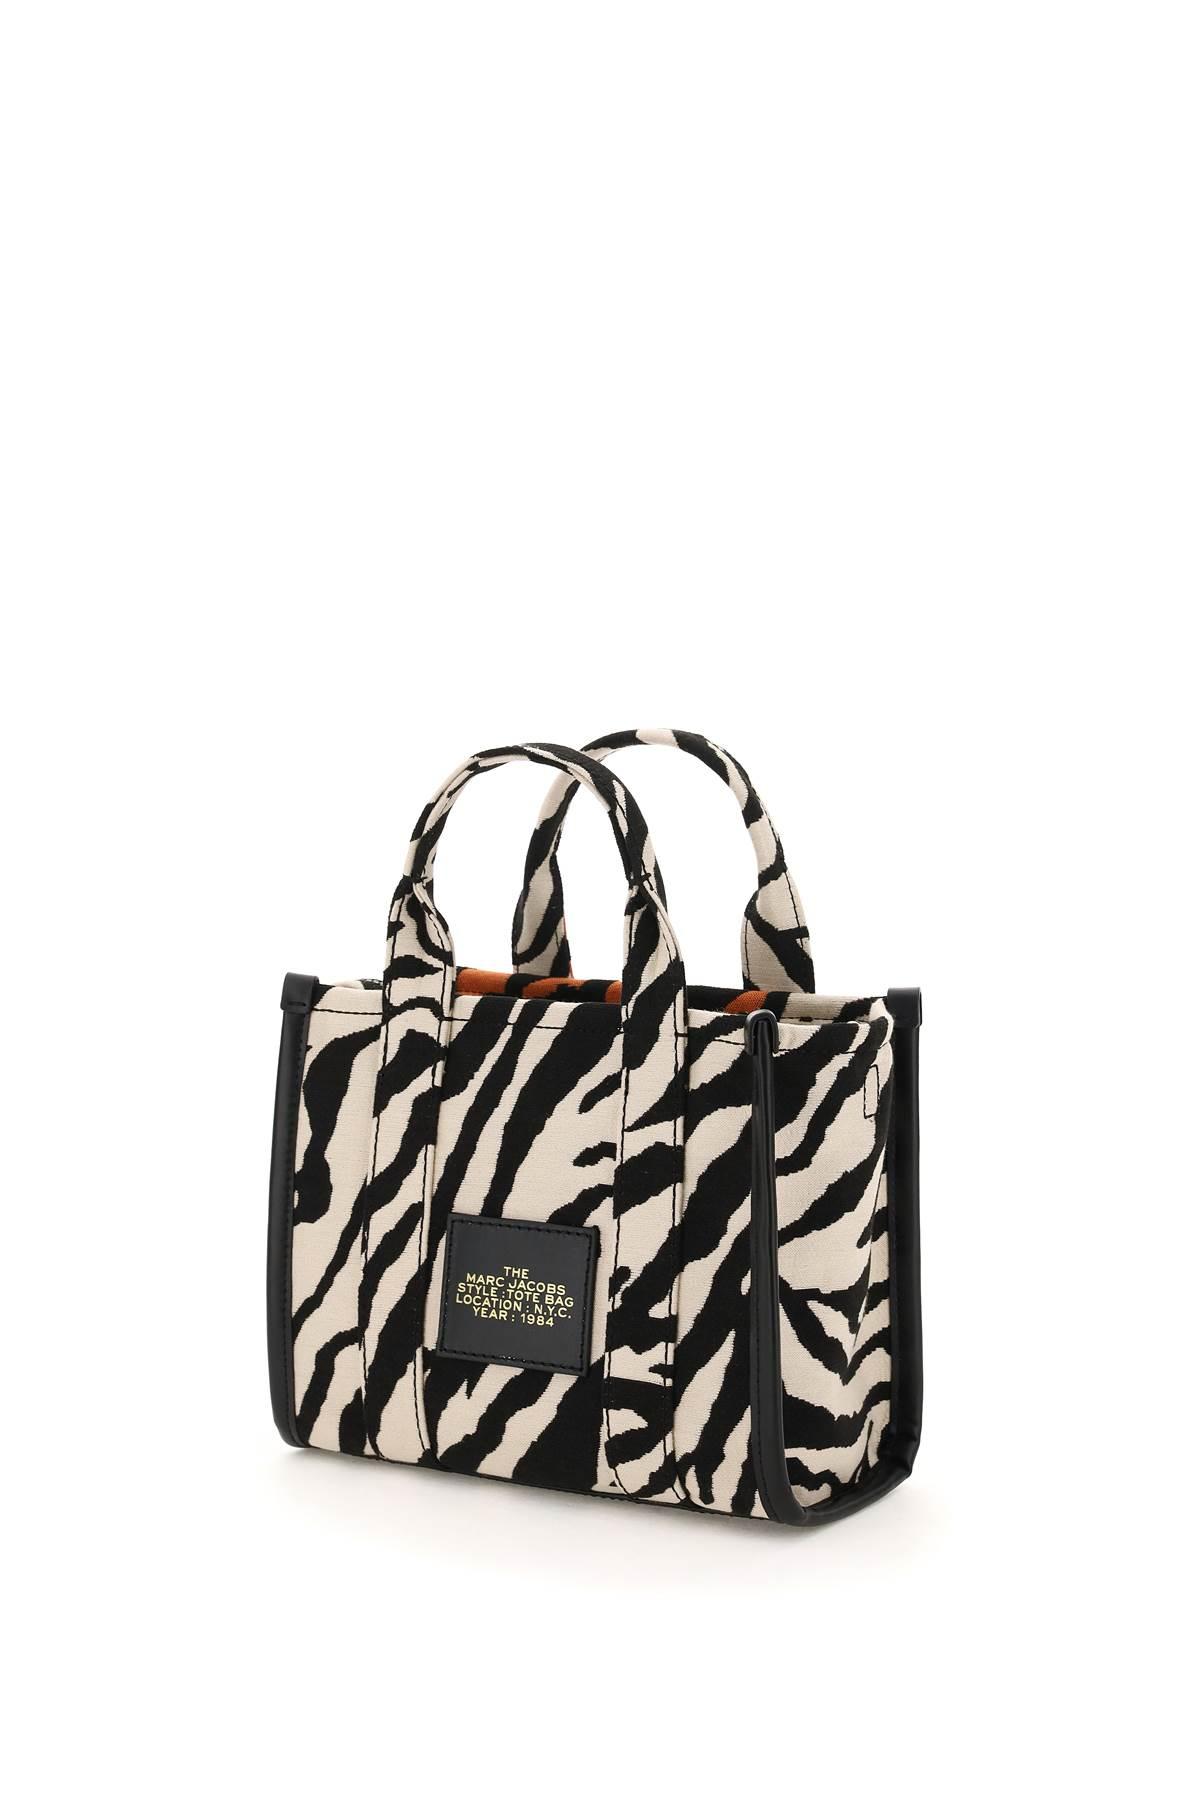 MARC JACOBS: The Year of the Tiger mini jacquard tote bag - Beige